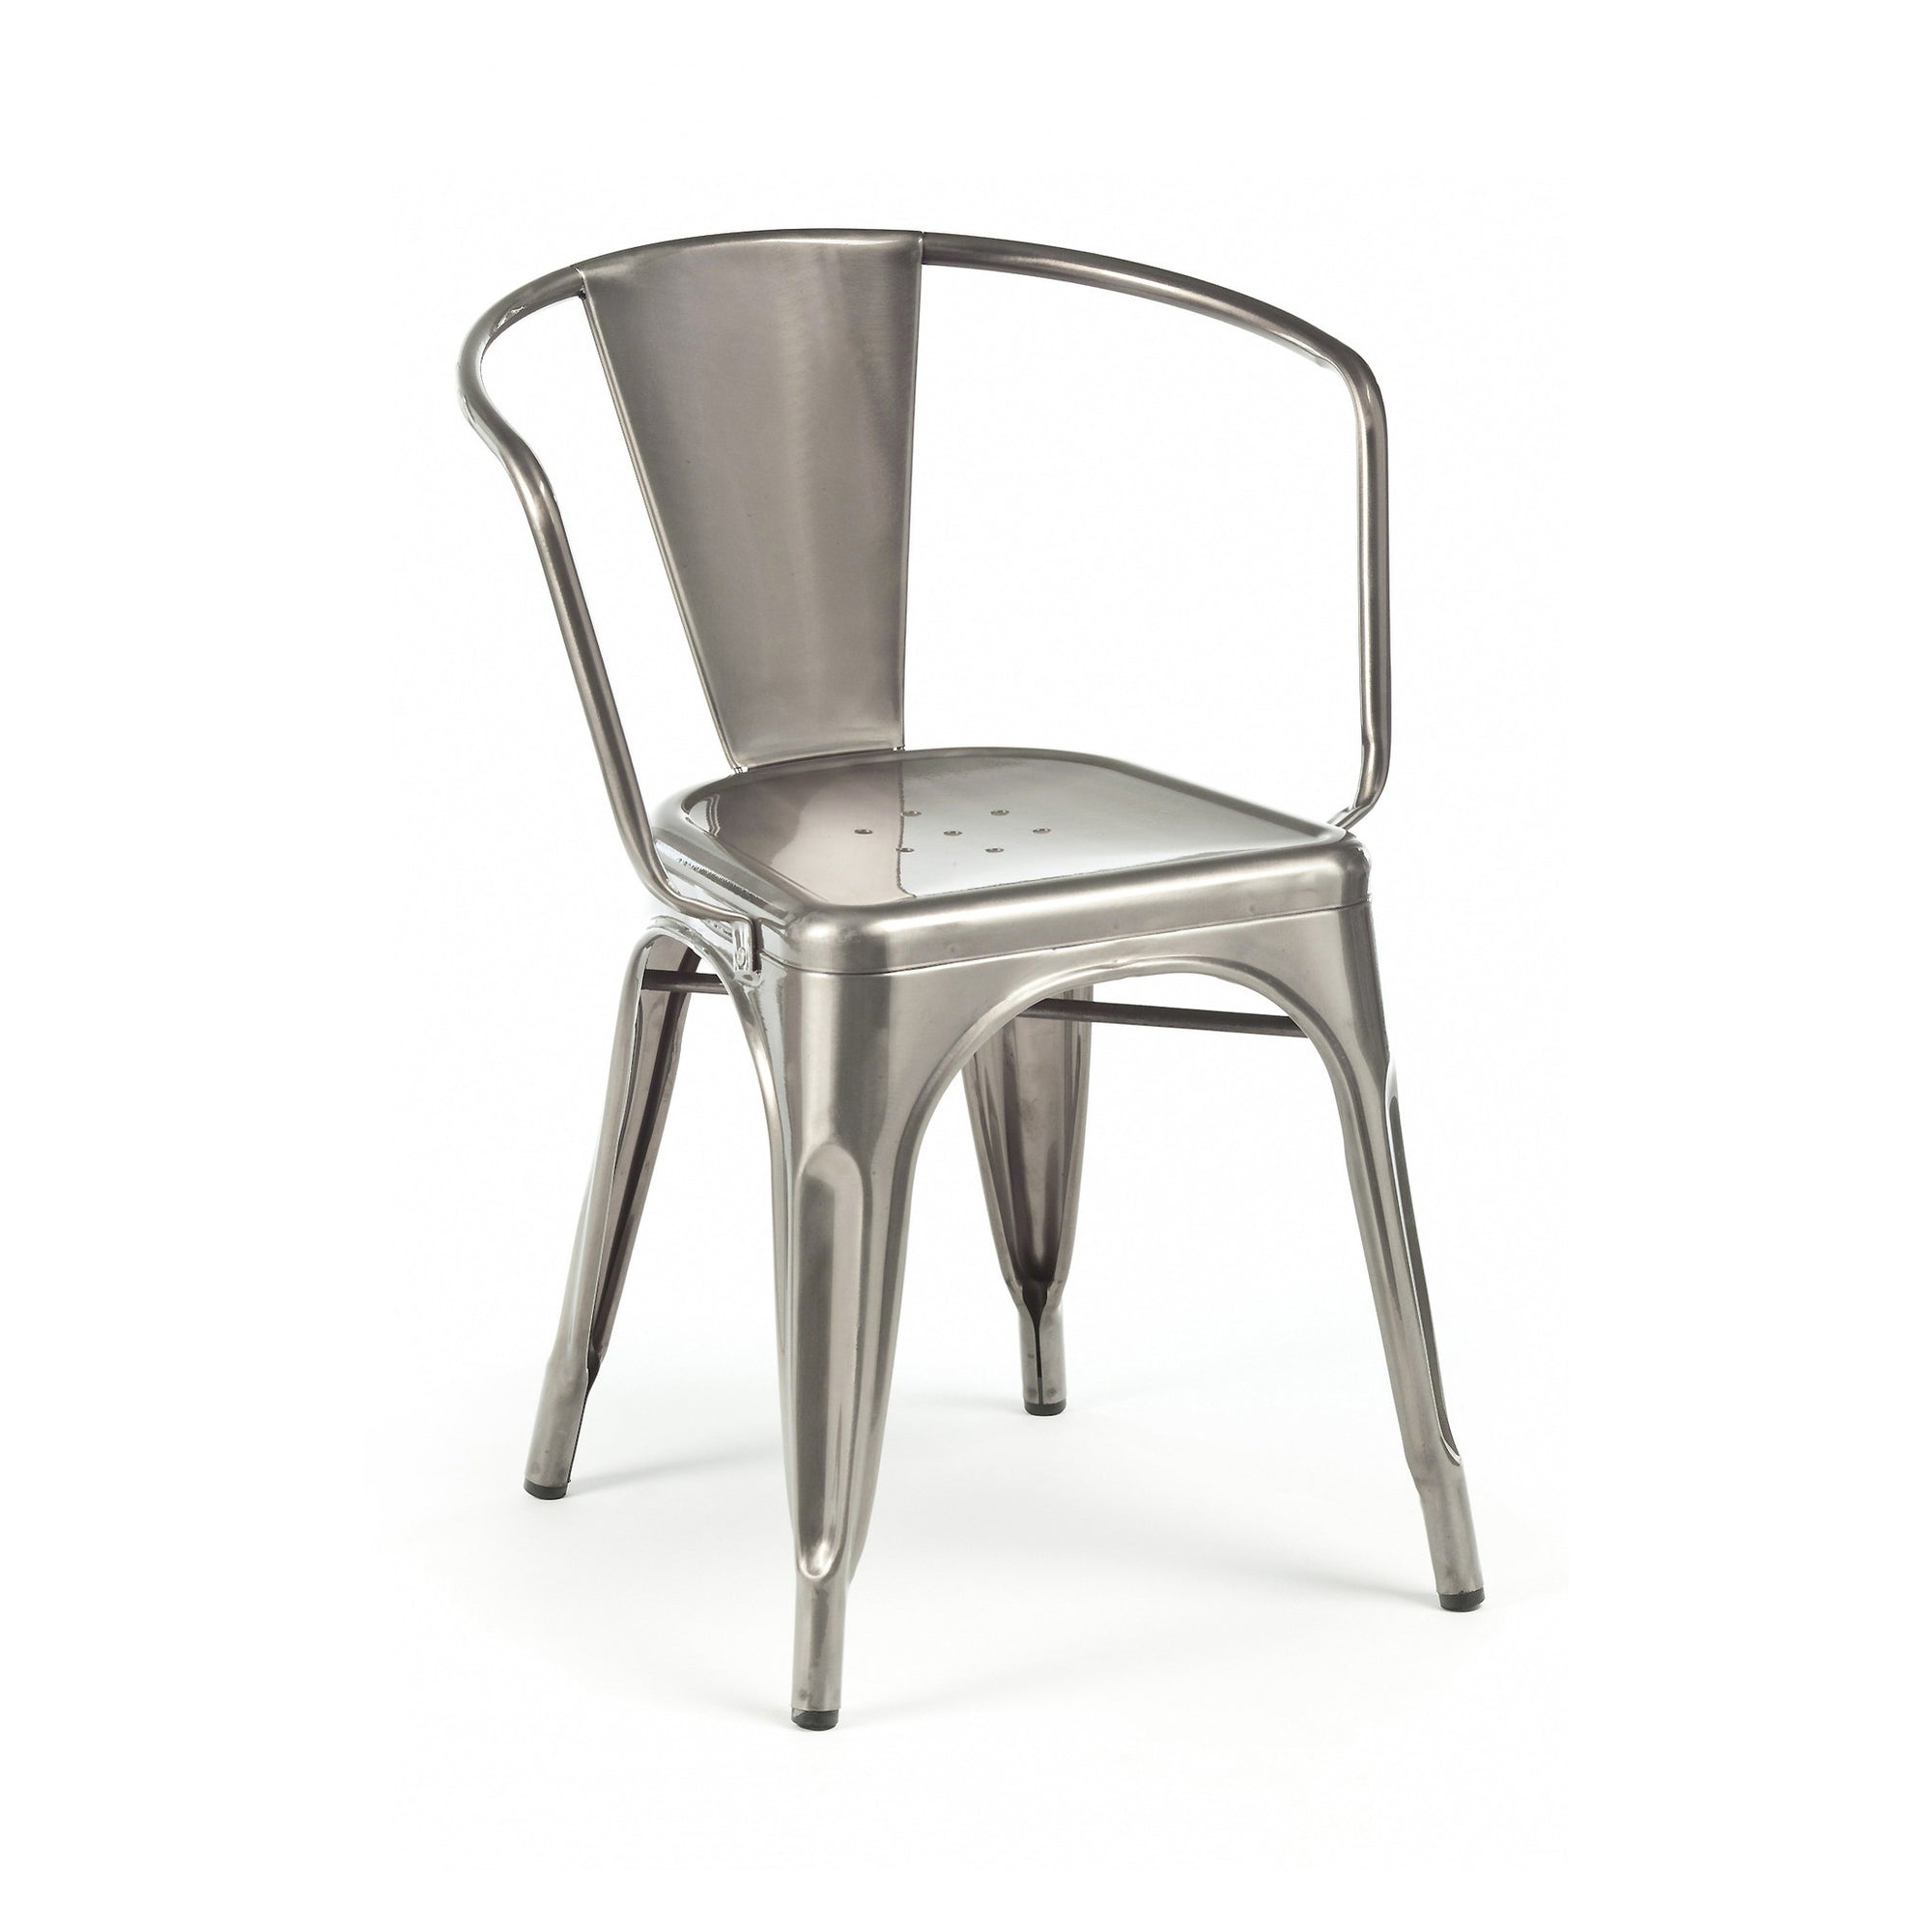 DesignLabMN-Dreux Steel Dining Chair (Set of 4)-Dining Chairs-MODTEMPO